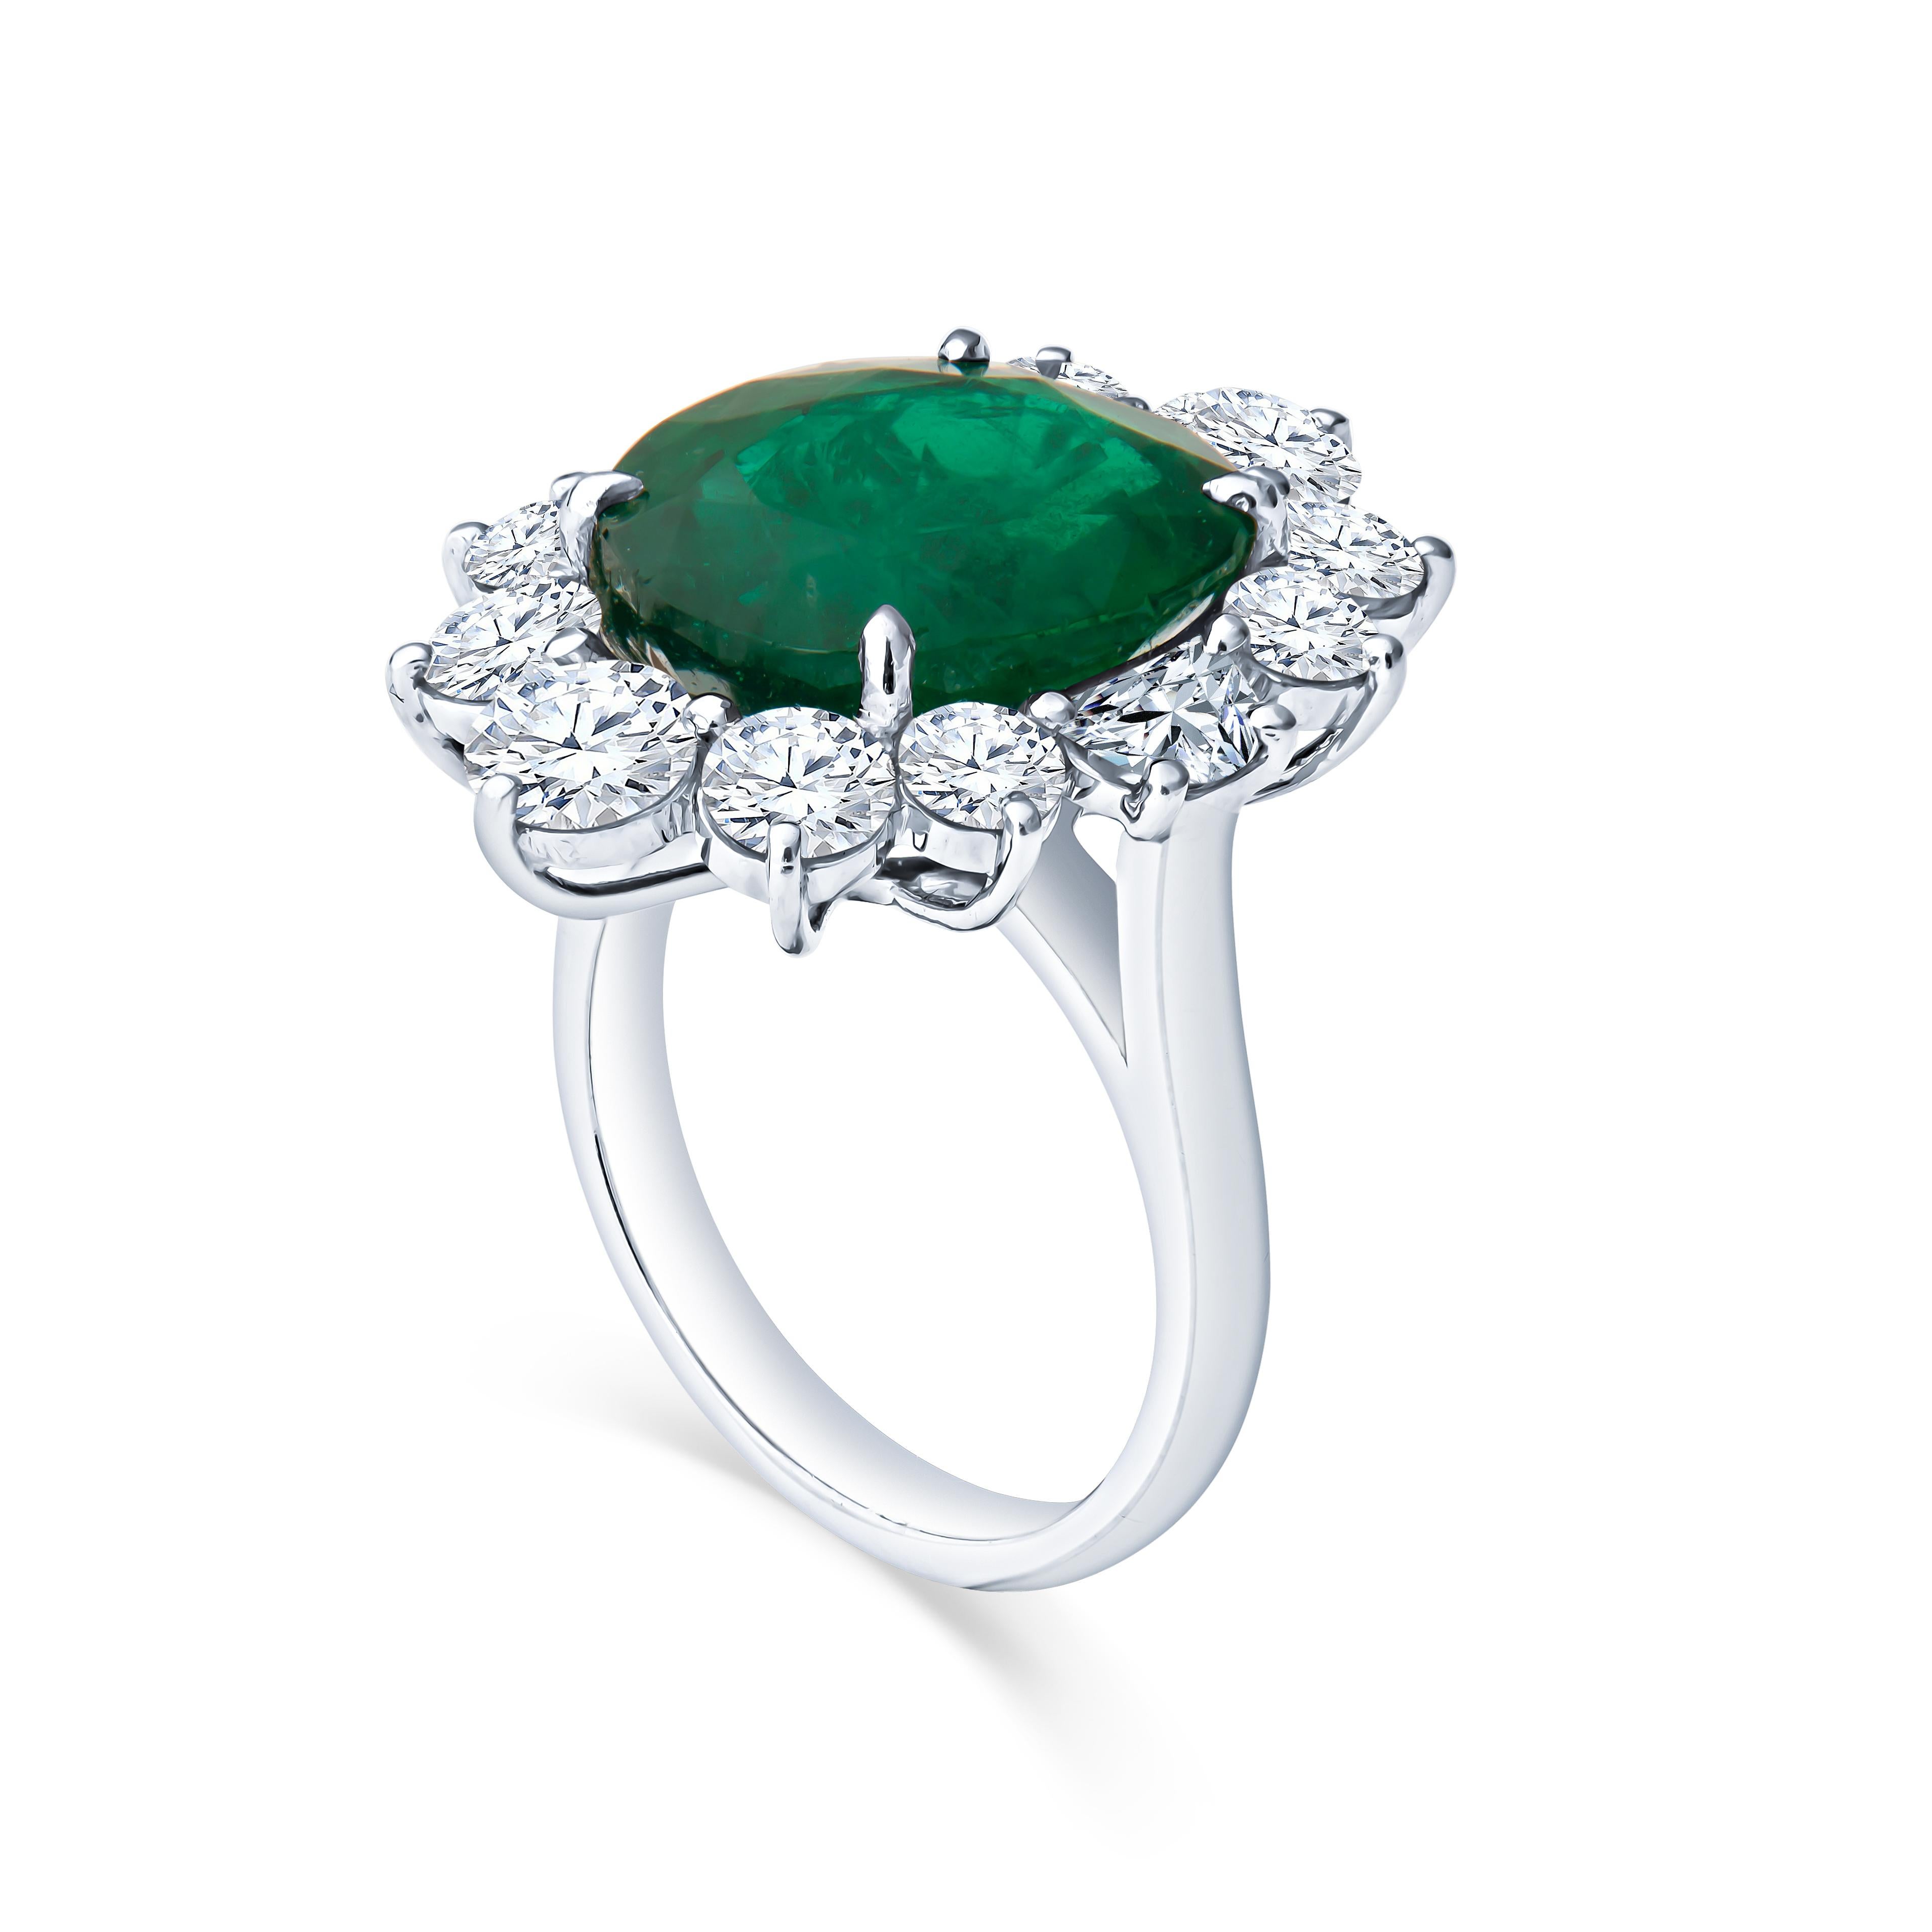 Oval Cut 8.44 Carat Oval Emerald with 3.35 Carat in Diamond Floral Halo Platinum Ring